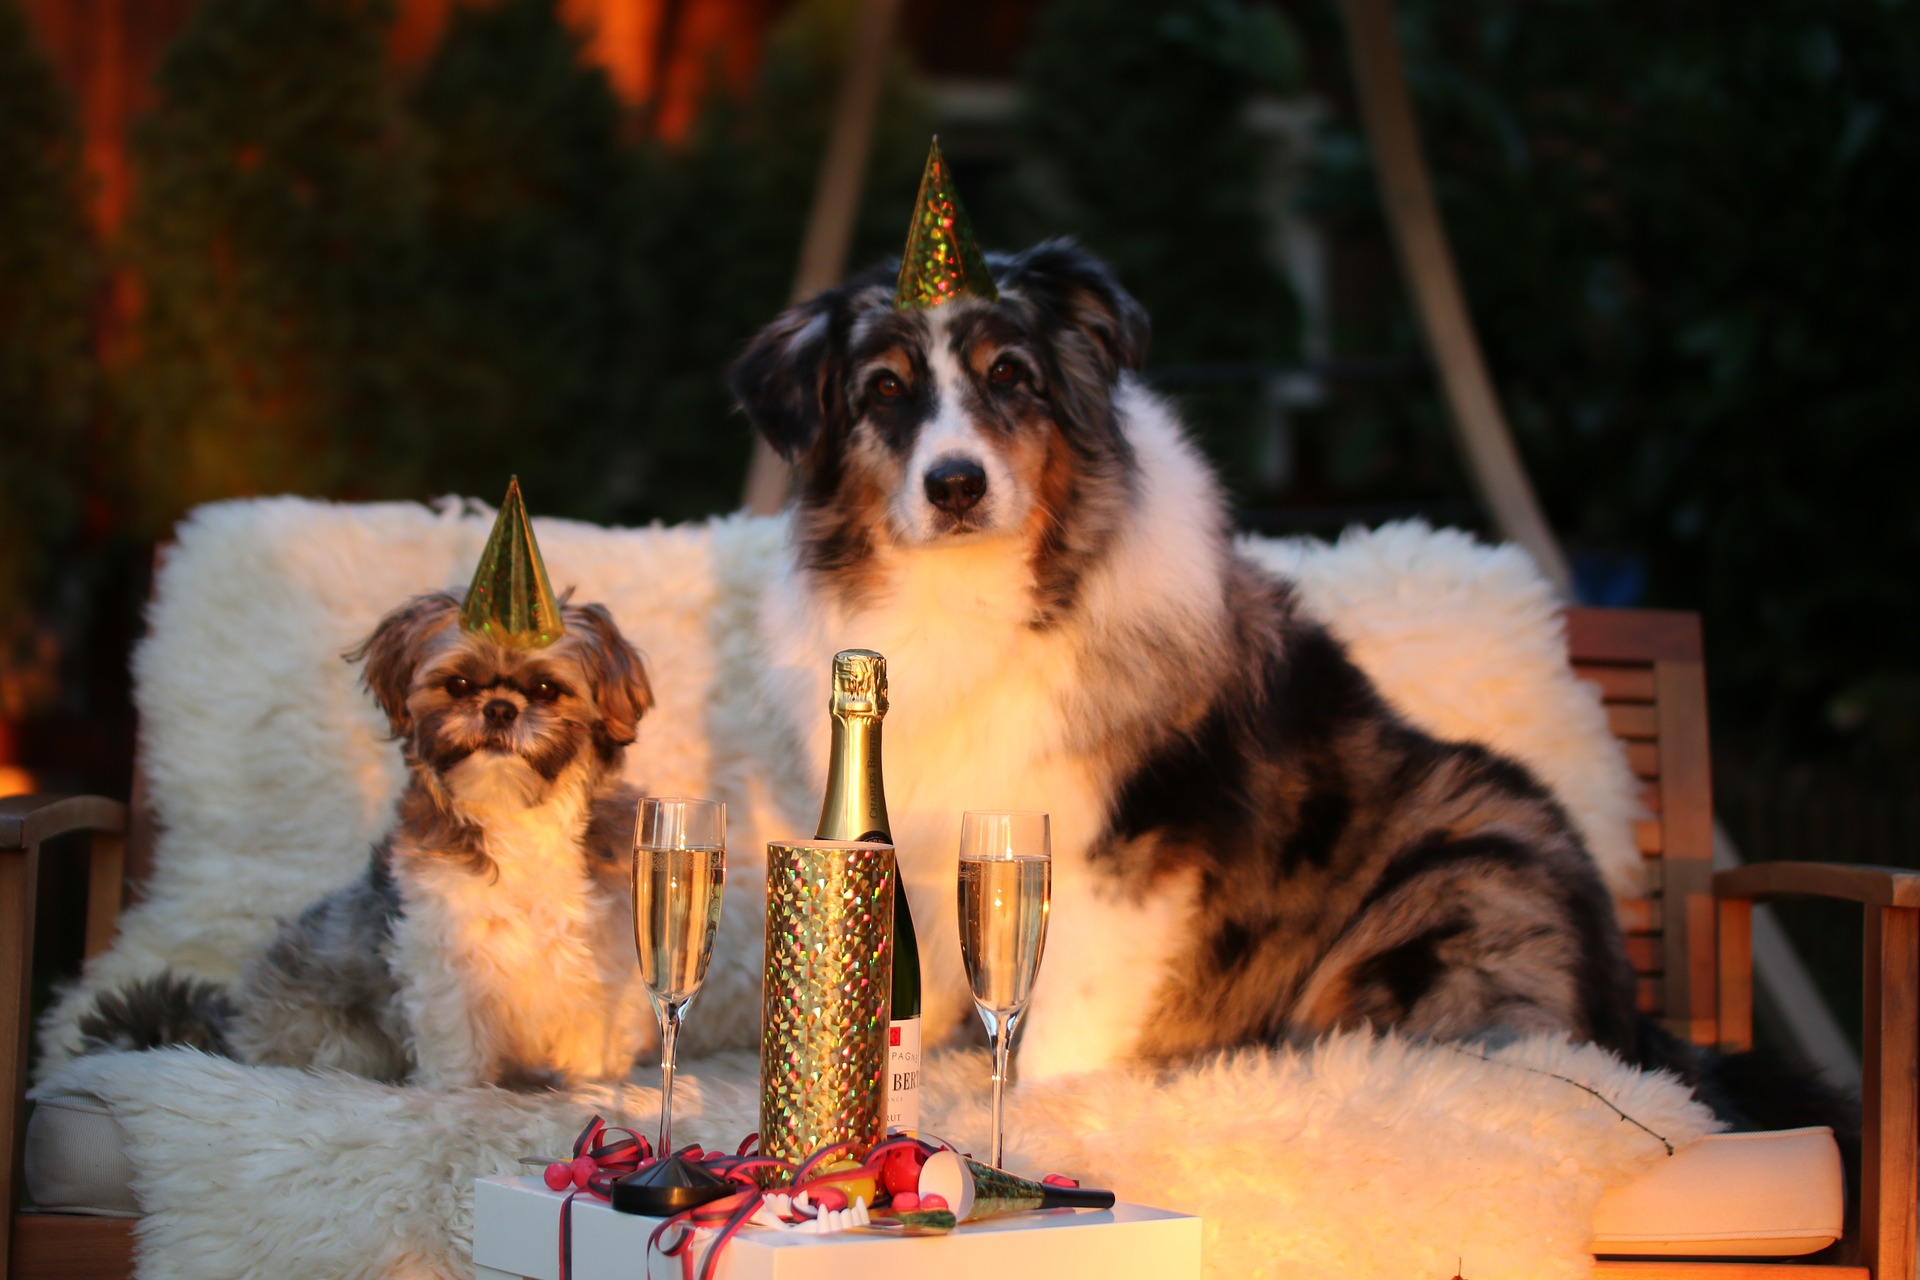 New Years Resolutions for Pet Owners